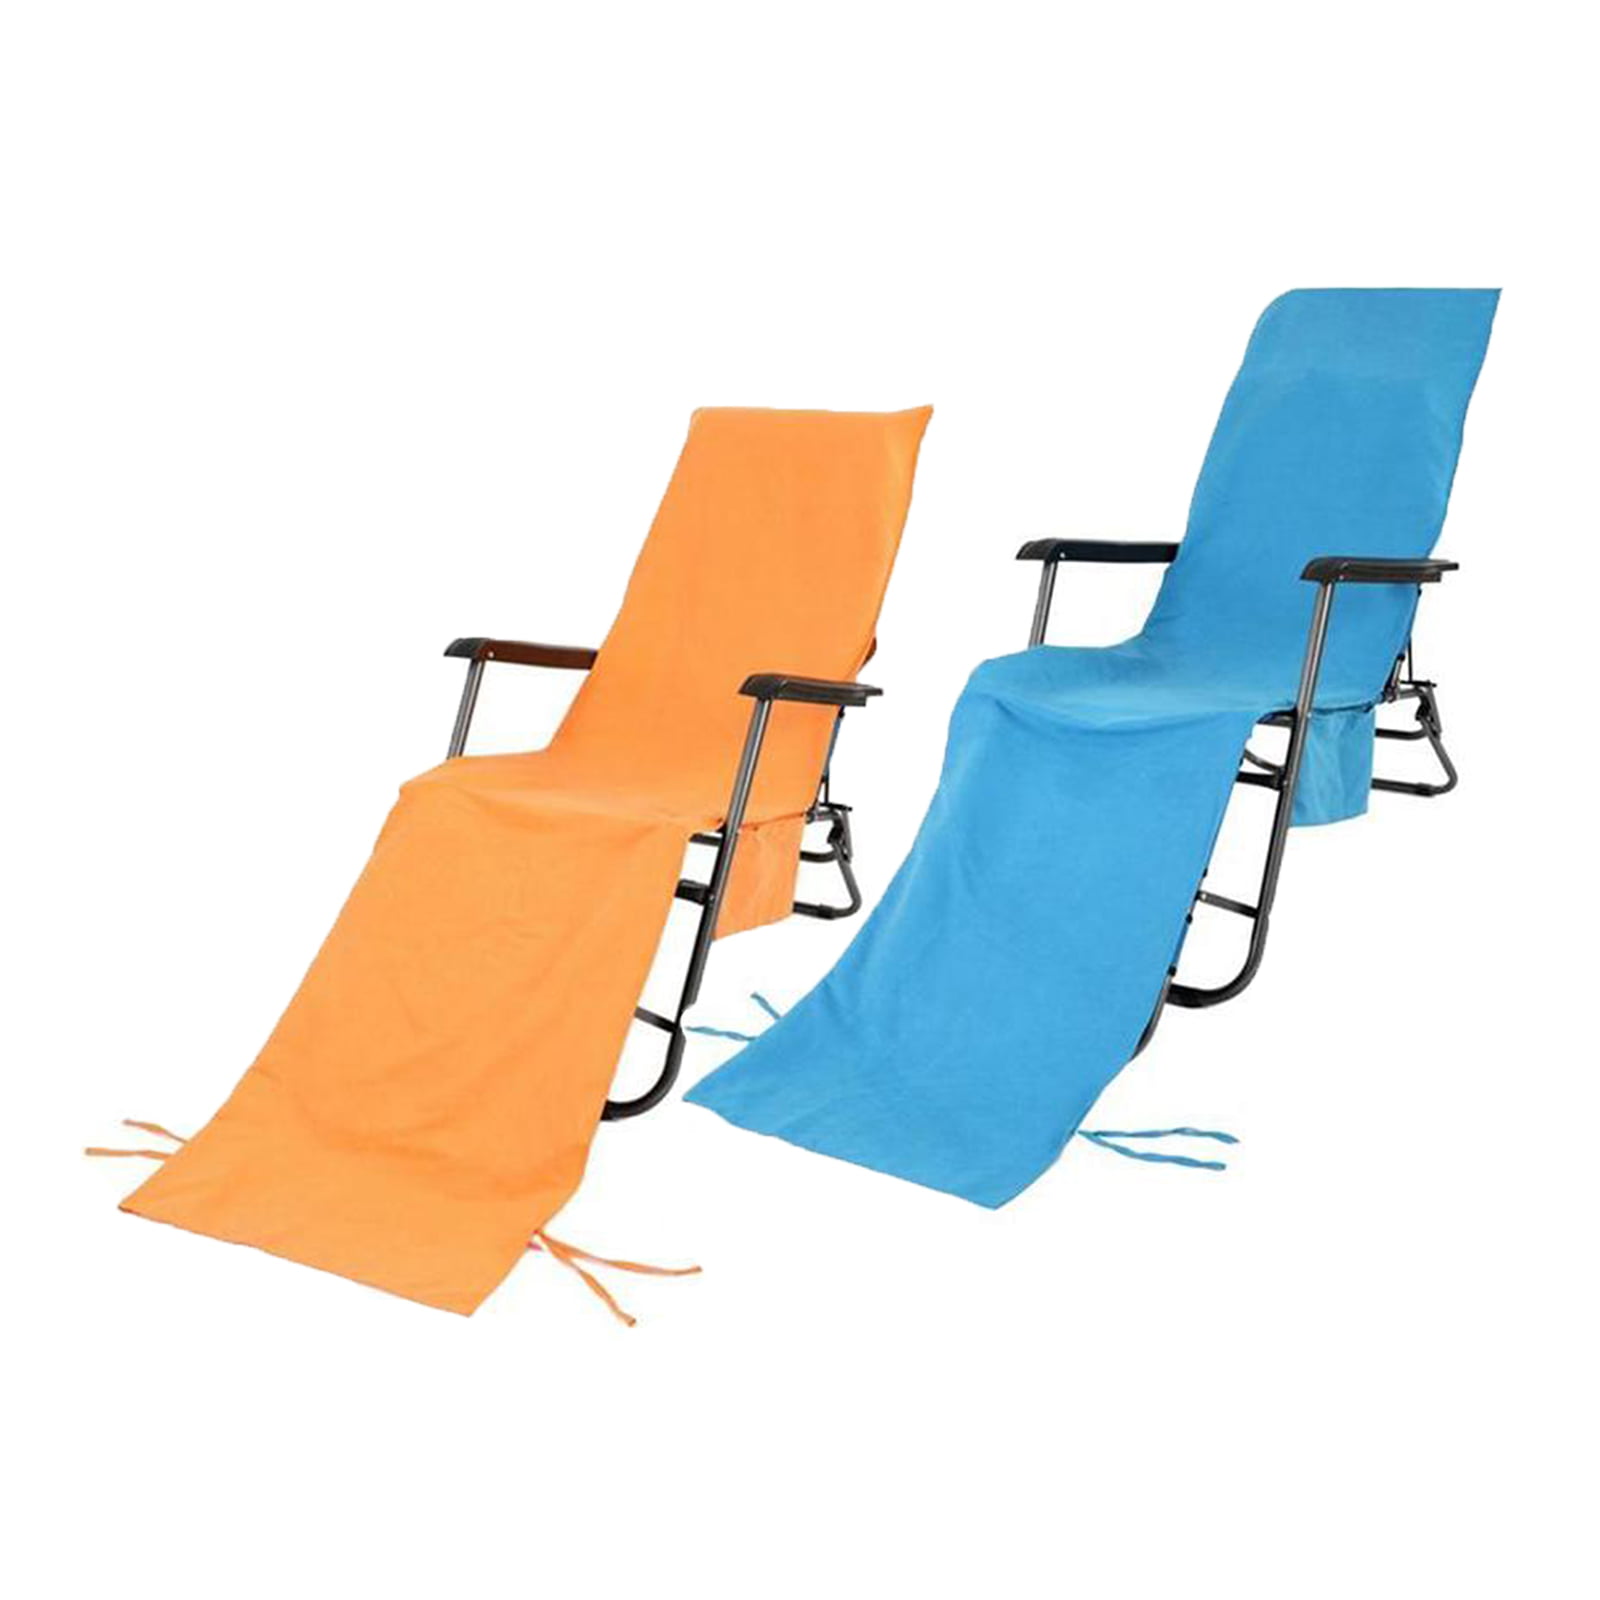 2pcs Lounge Chair Cover Microfiber Chaise Towels Terry for Beach Pool 